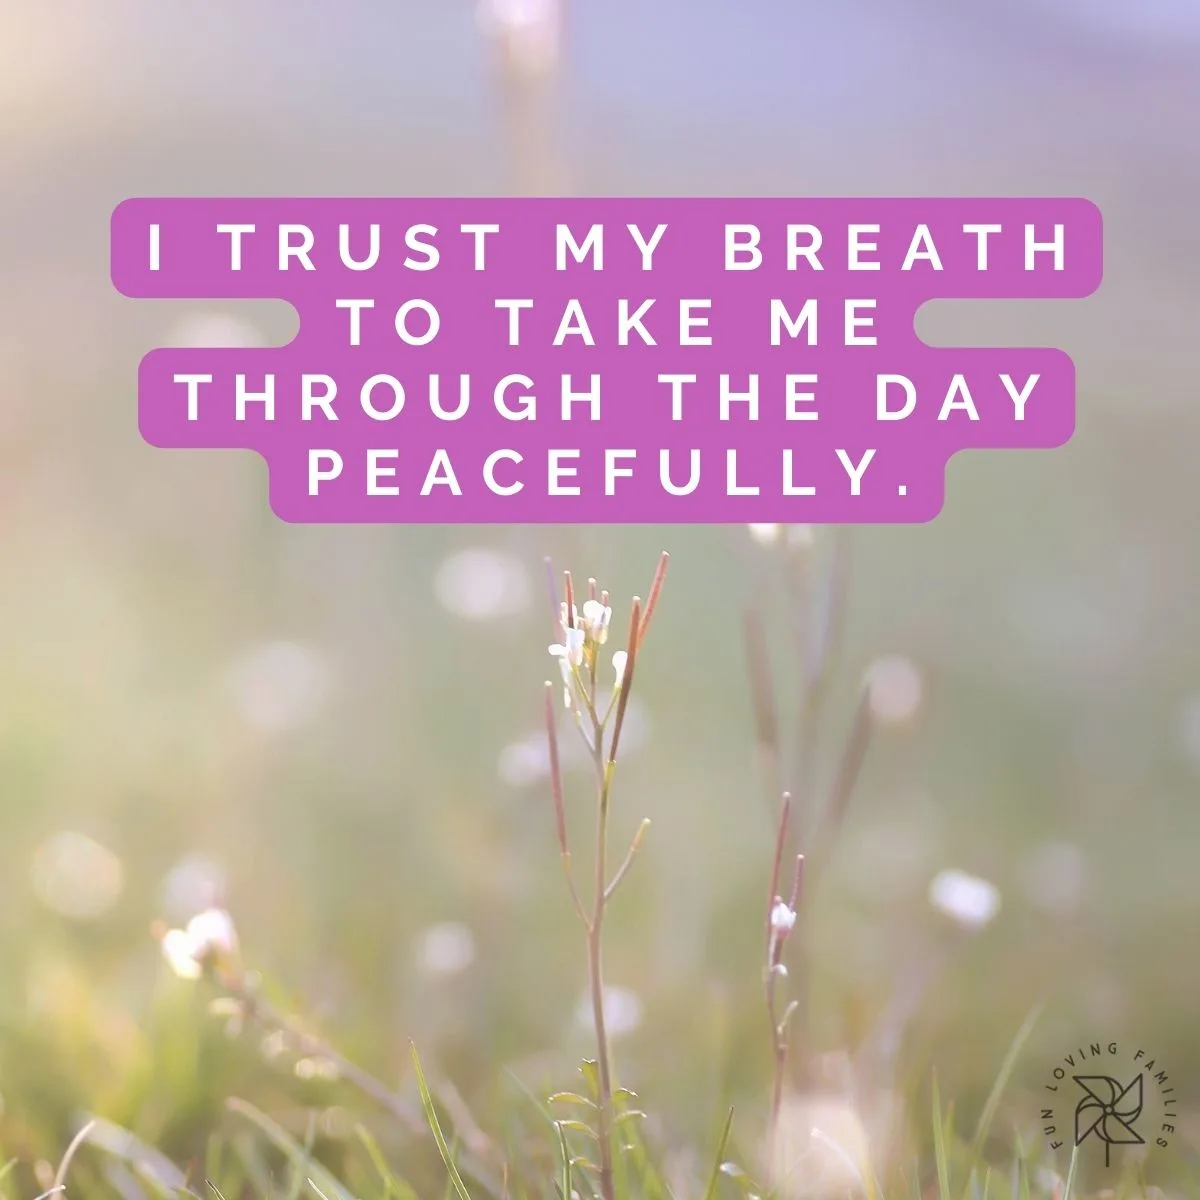 I trust my breath to take me through the day peacefully affirmation image